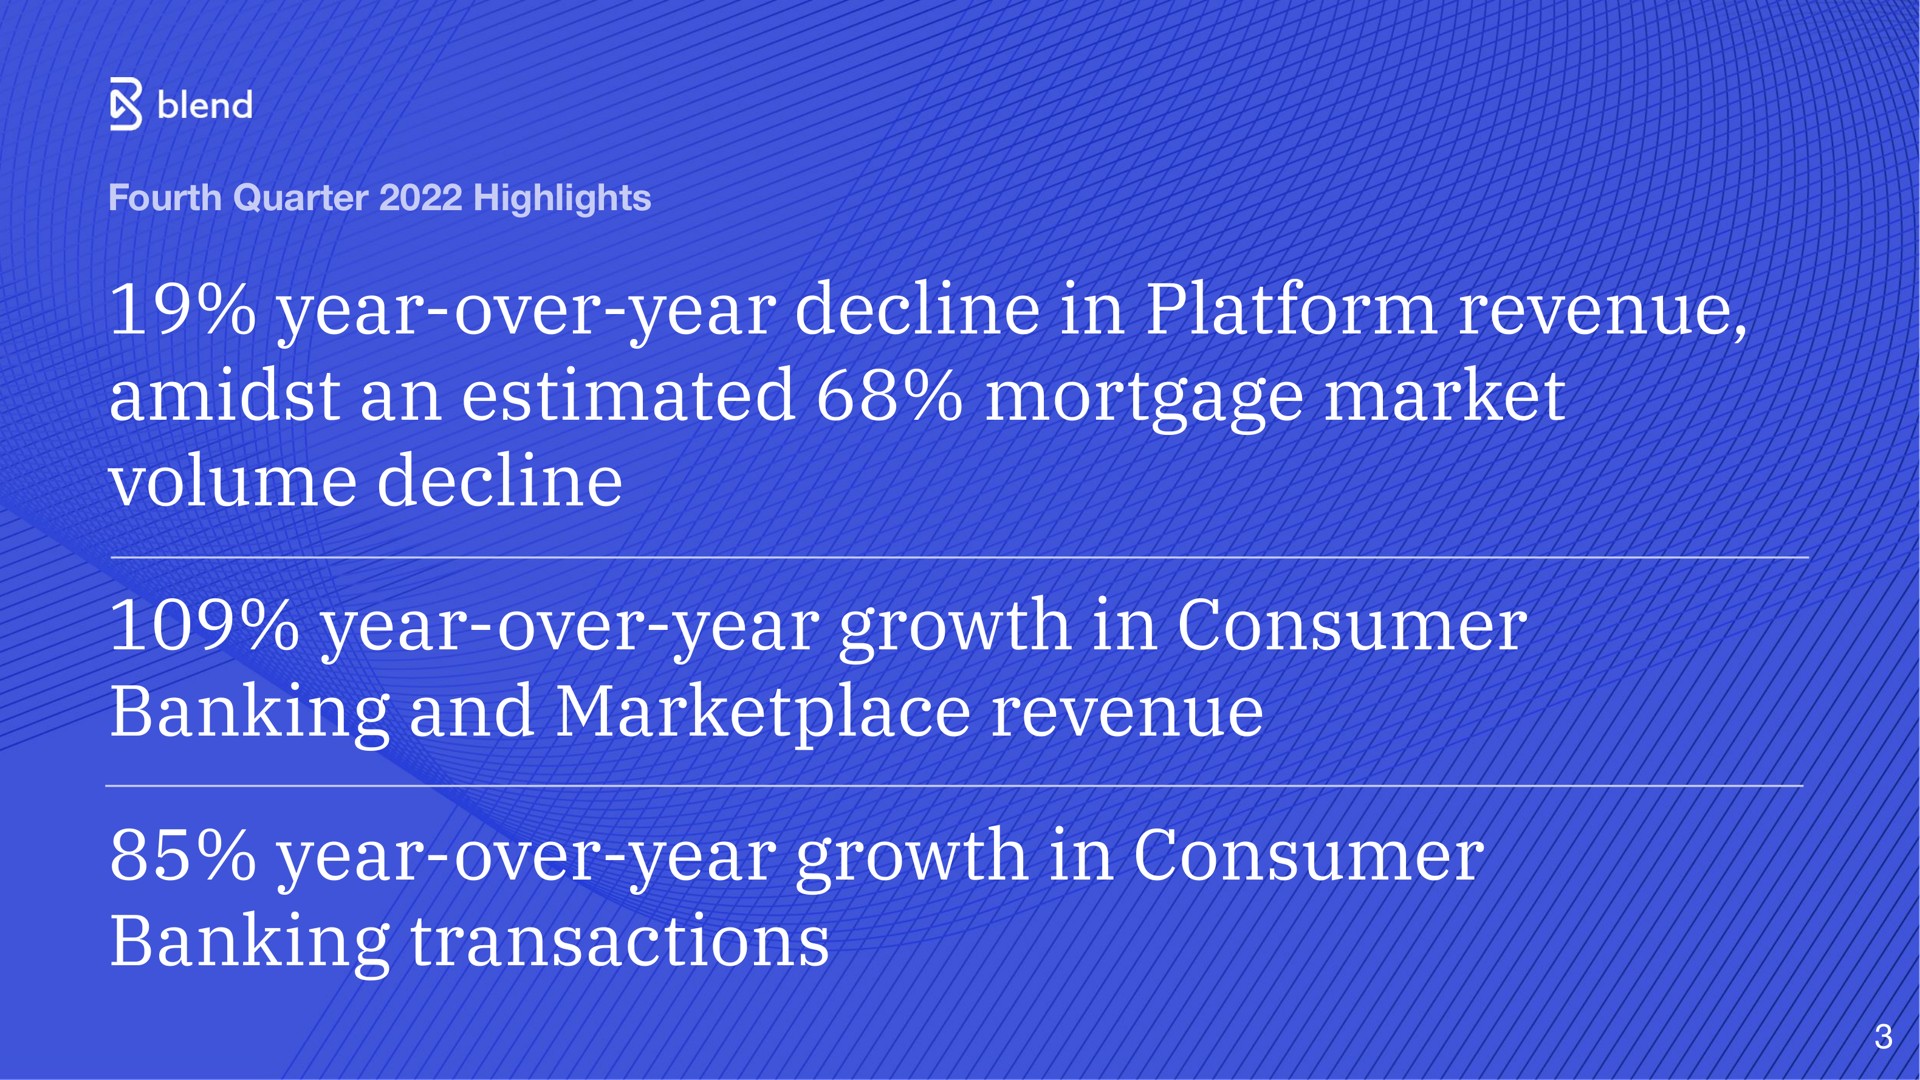 fourth quarter highlights year over year decline in platform revenue amidst an estimated mortgage market volume decline year over year growth in consumer banking and revenue year over year growth in consumer banking transactions | Blend